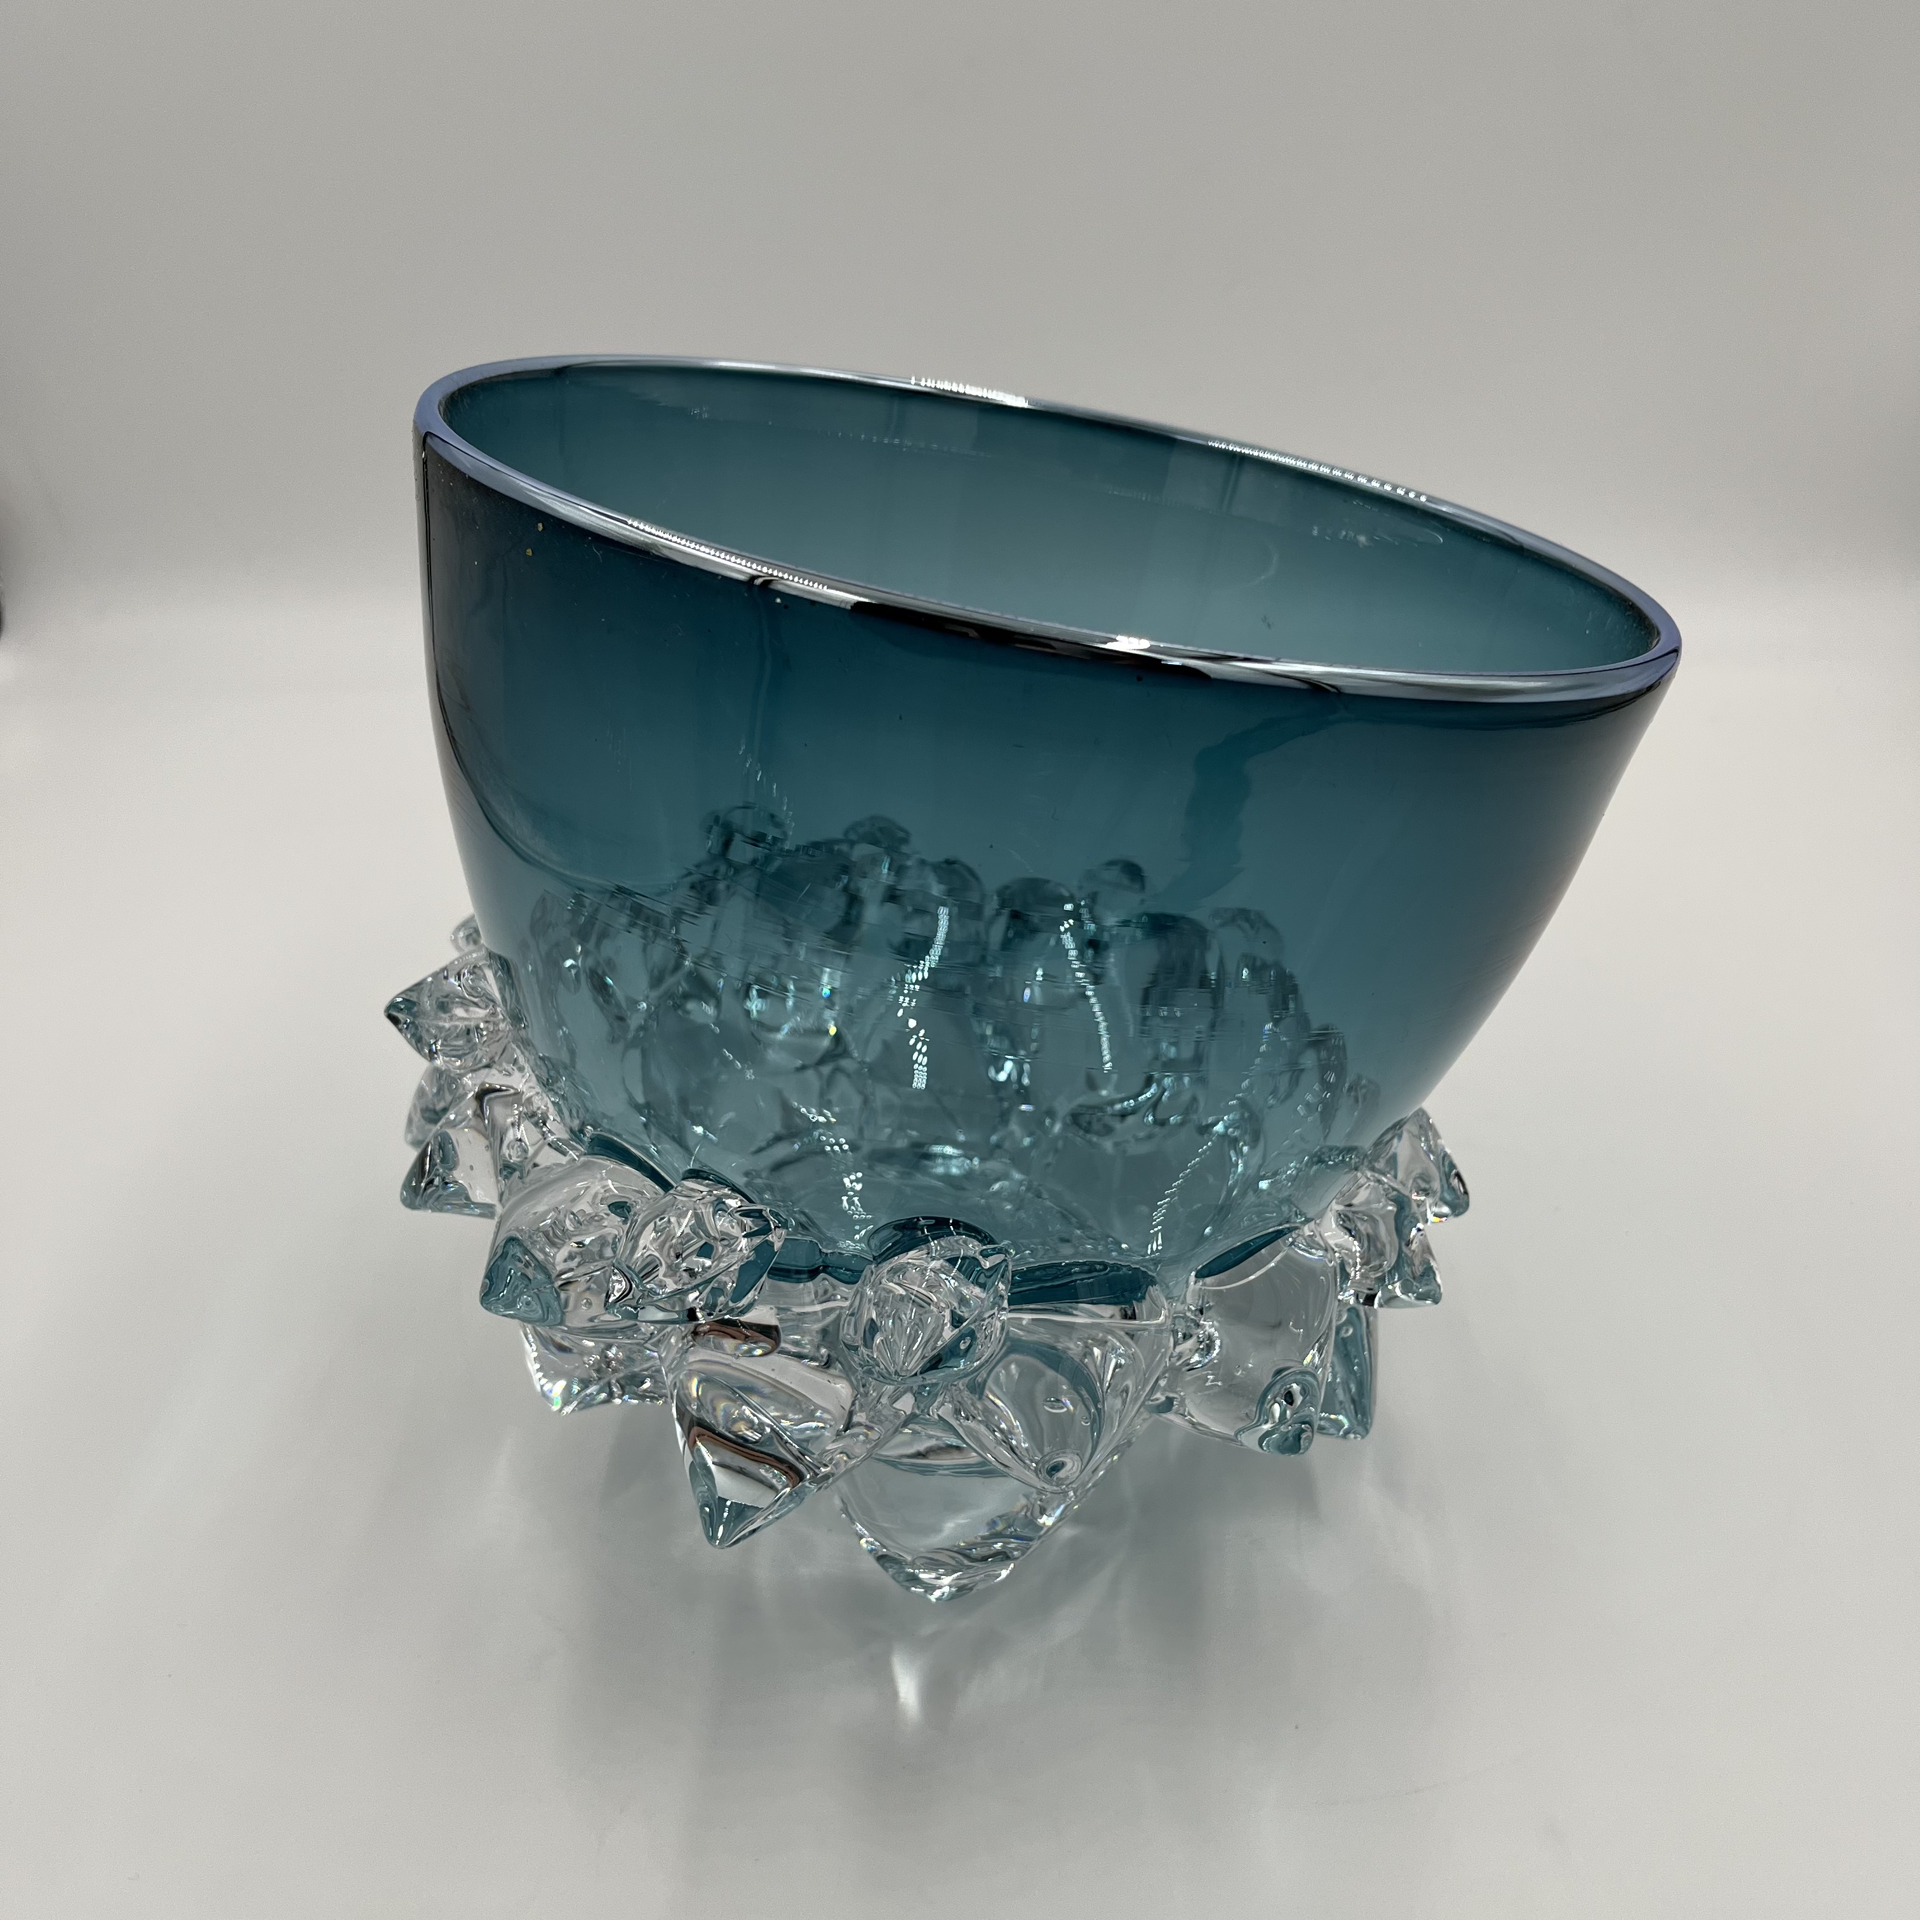 Steel Blue Thorn Vessel by Andrew Madvin